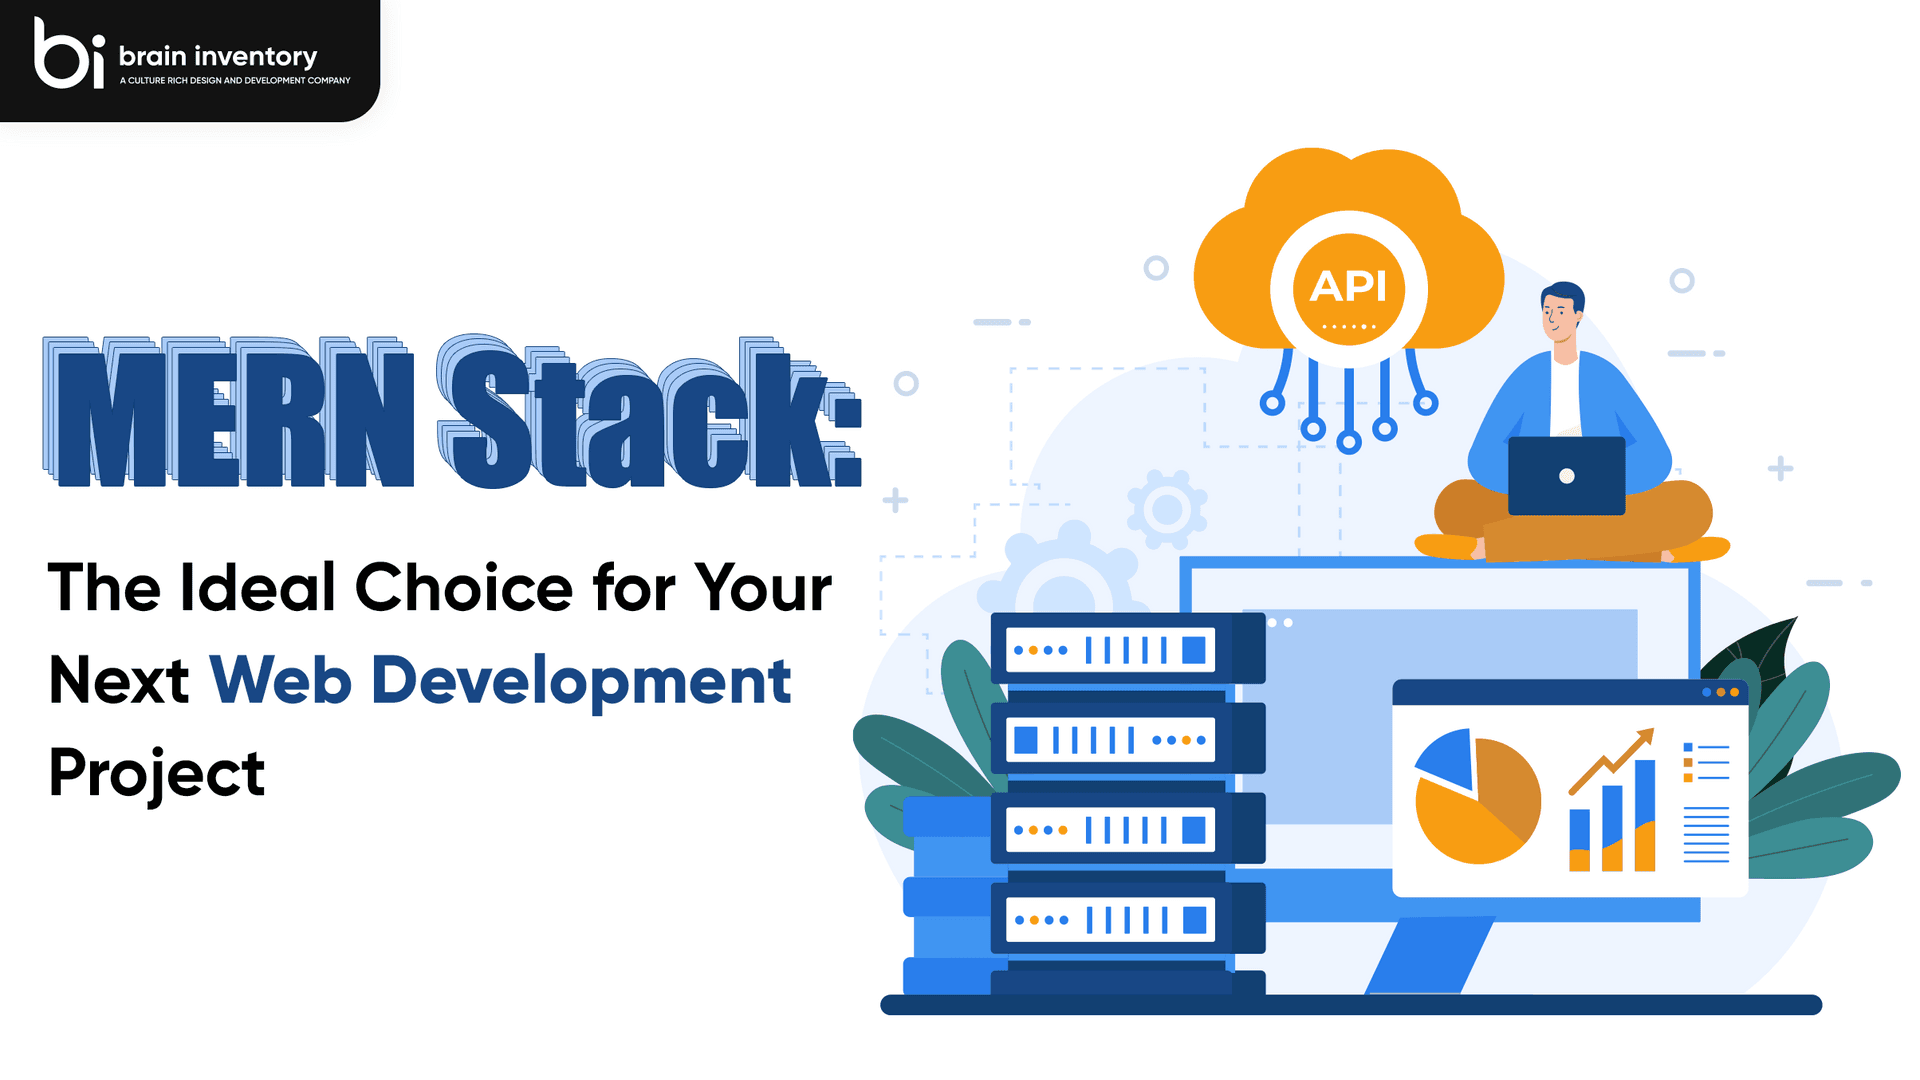 MERN Stack: The Ideal Choice for Your Next Web Development Project